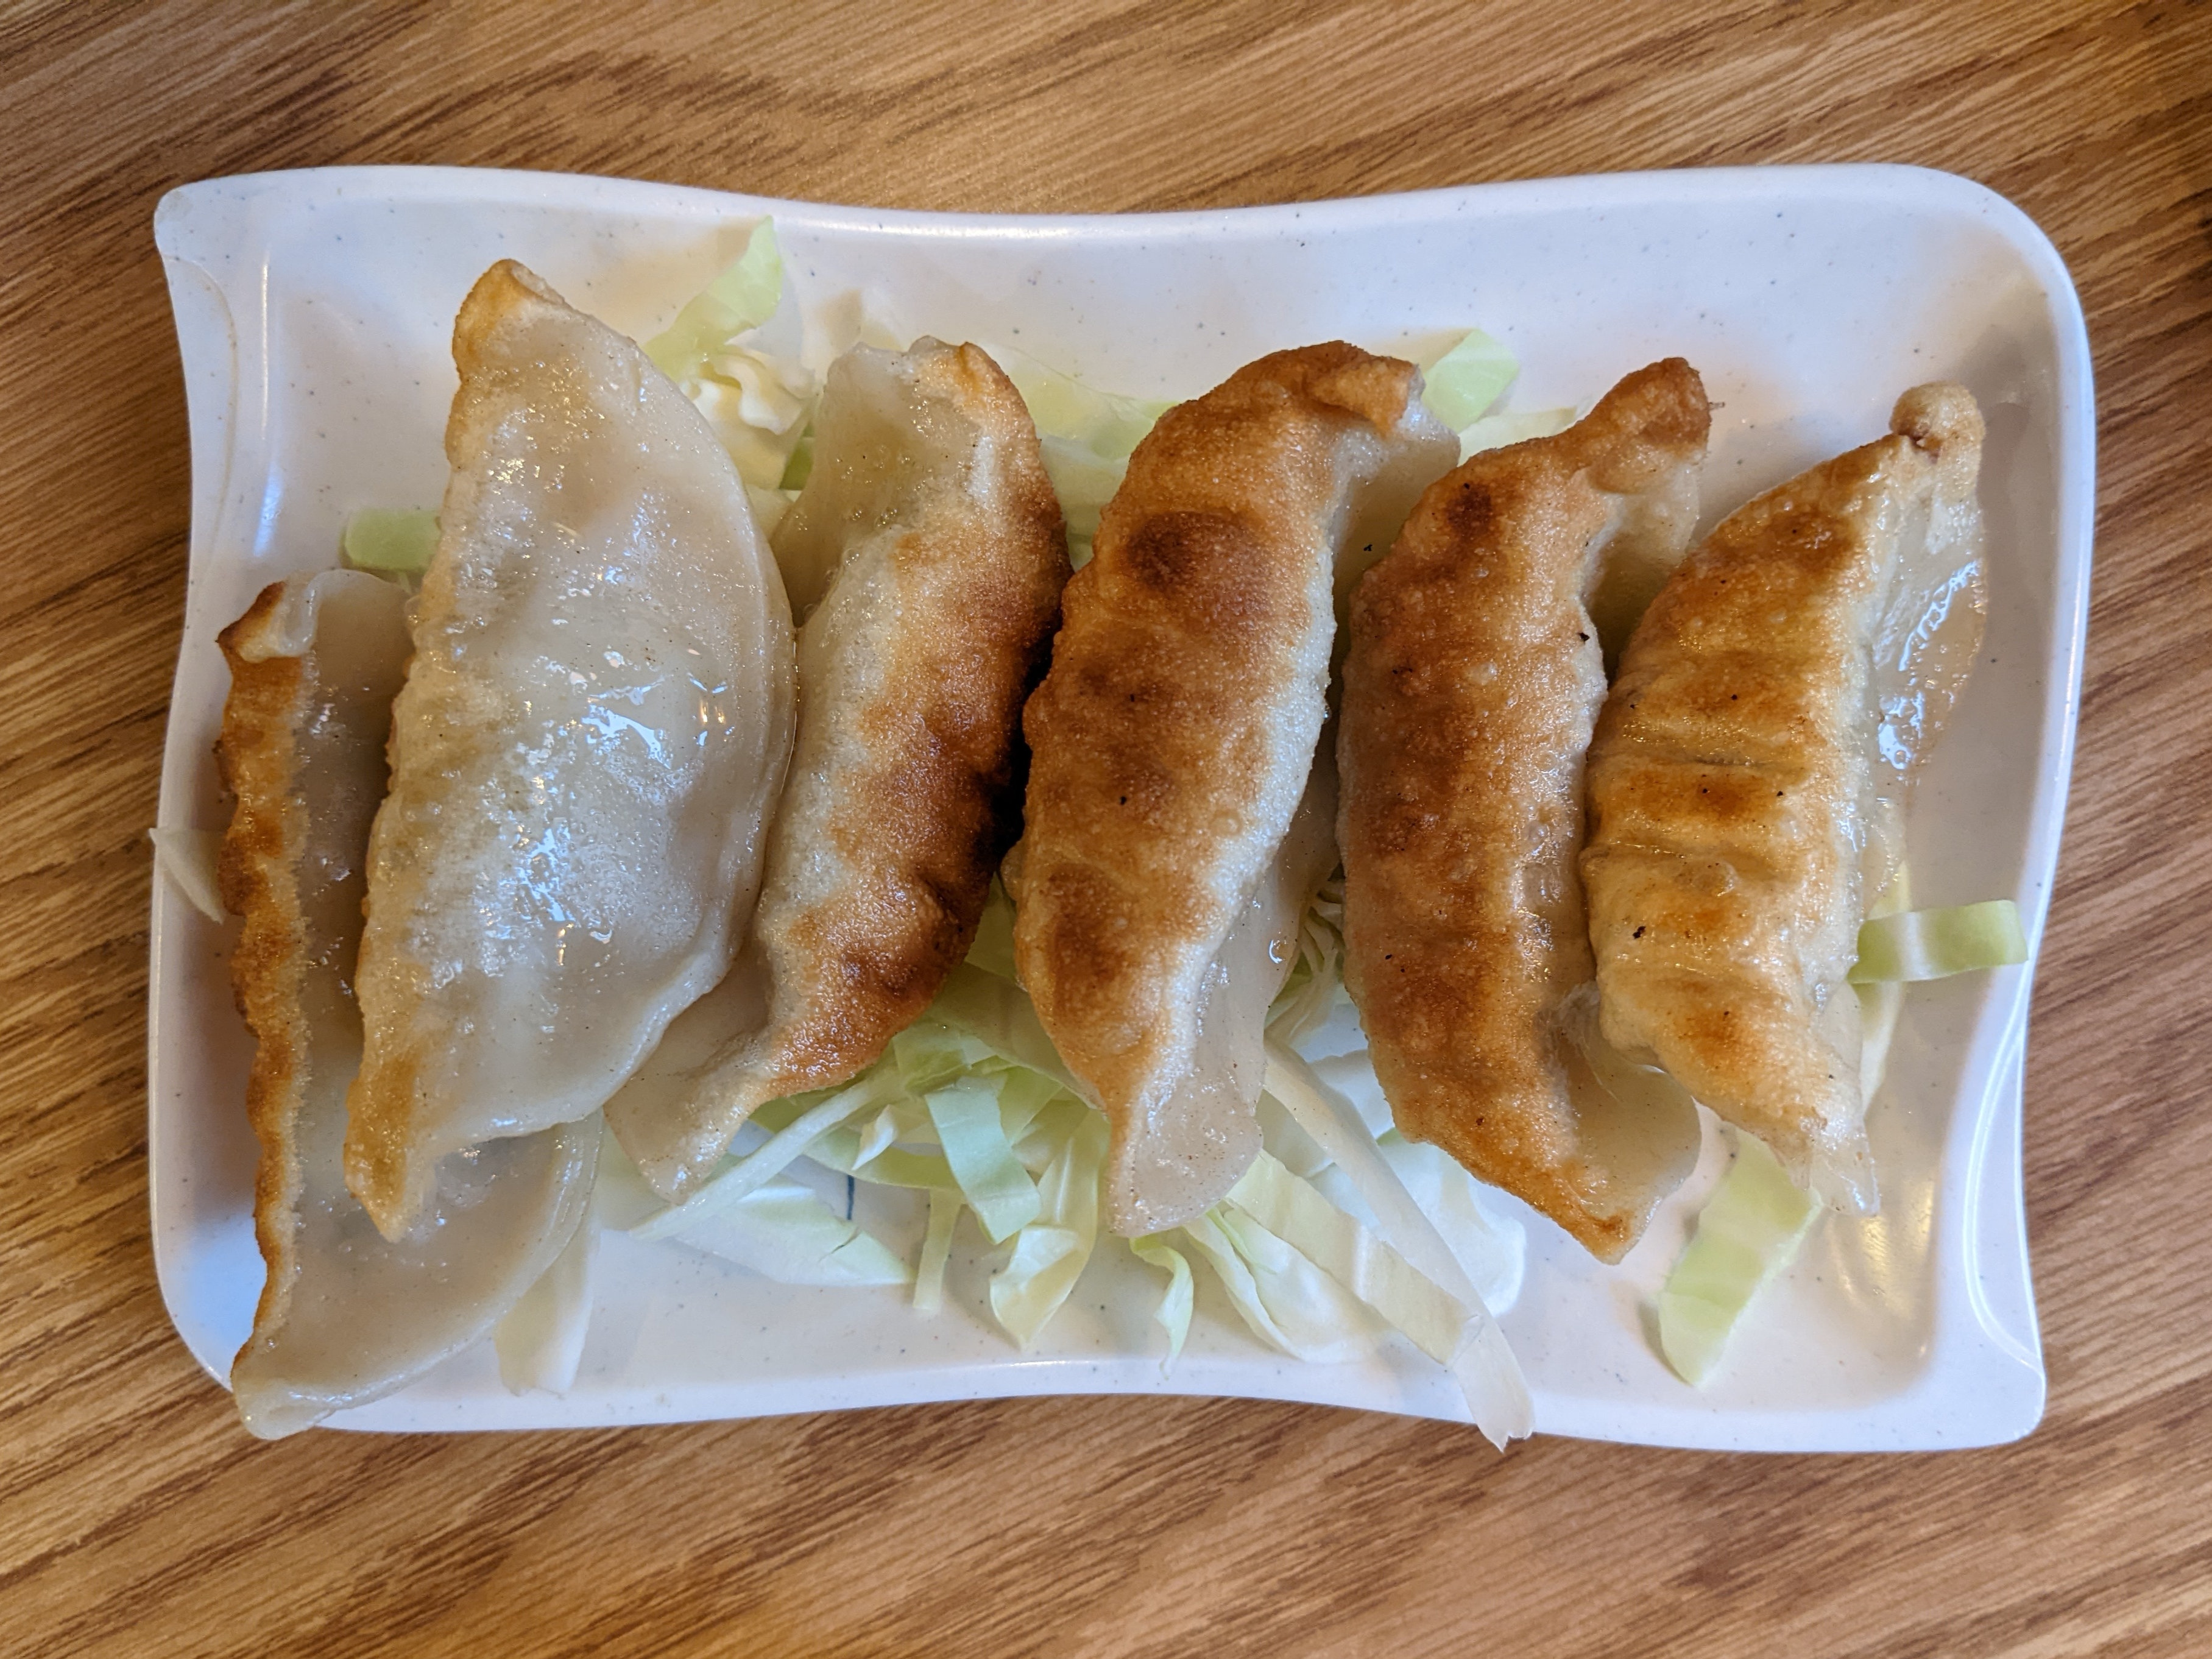 On a wooden table, there is a white plate with six fried dumplings on a bed of cabbage. Photo by Tayler Neumann.